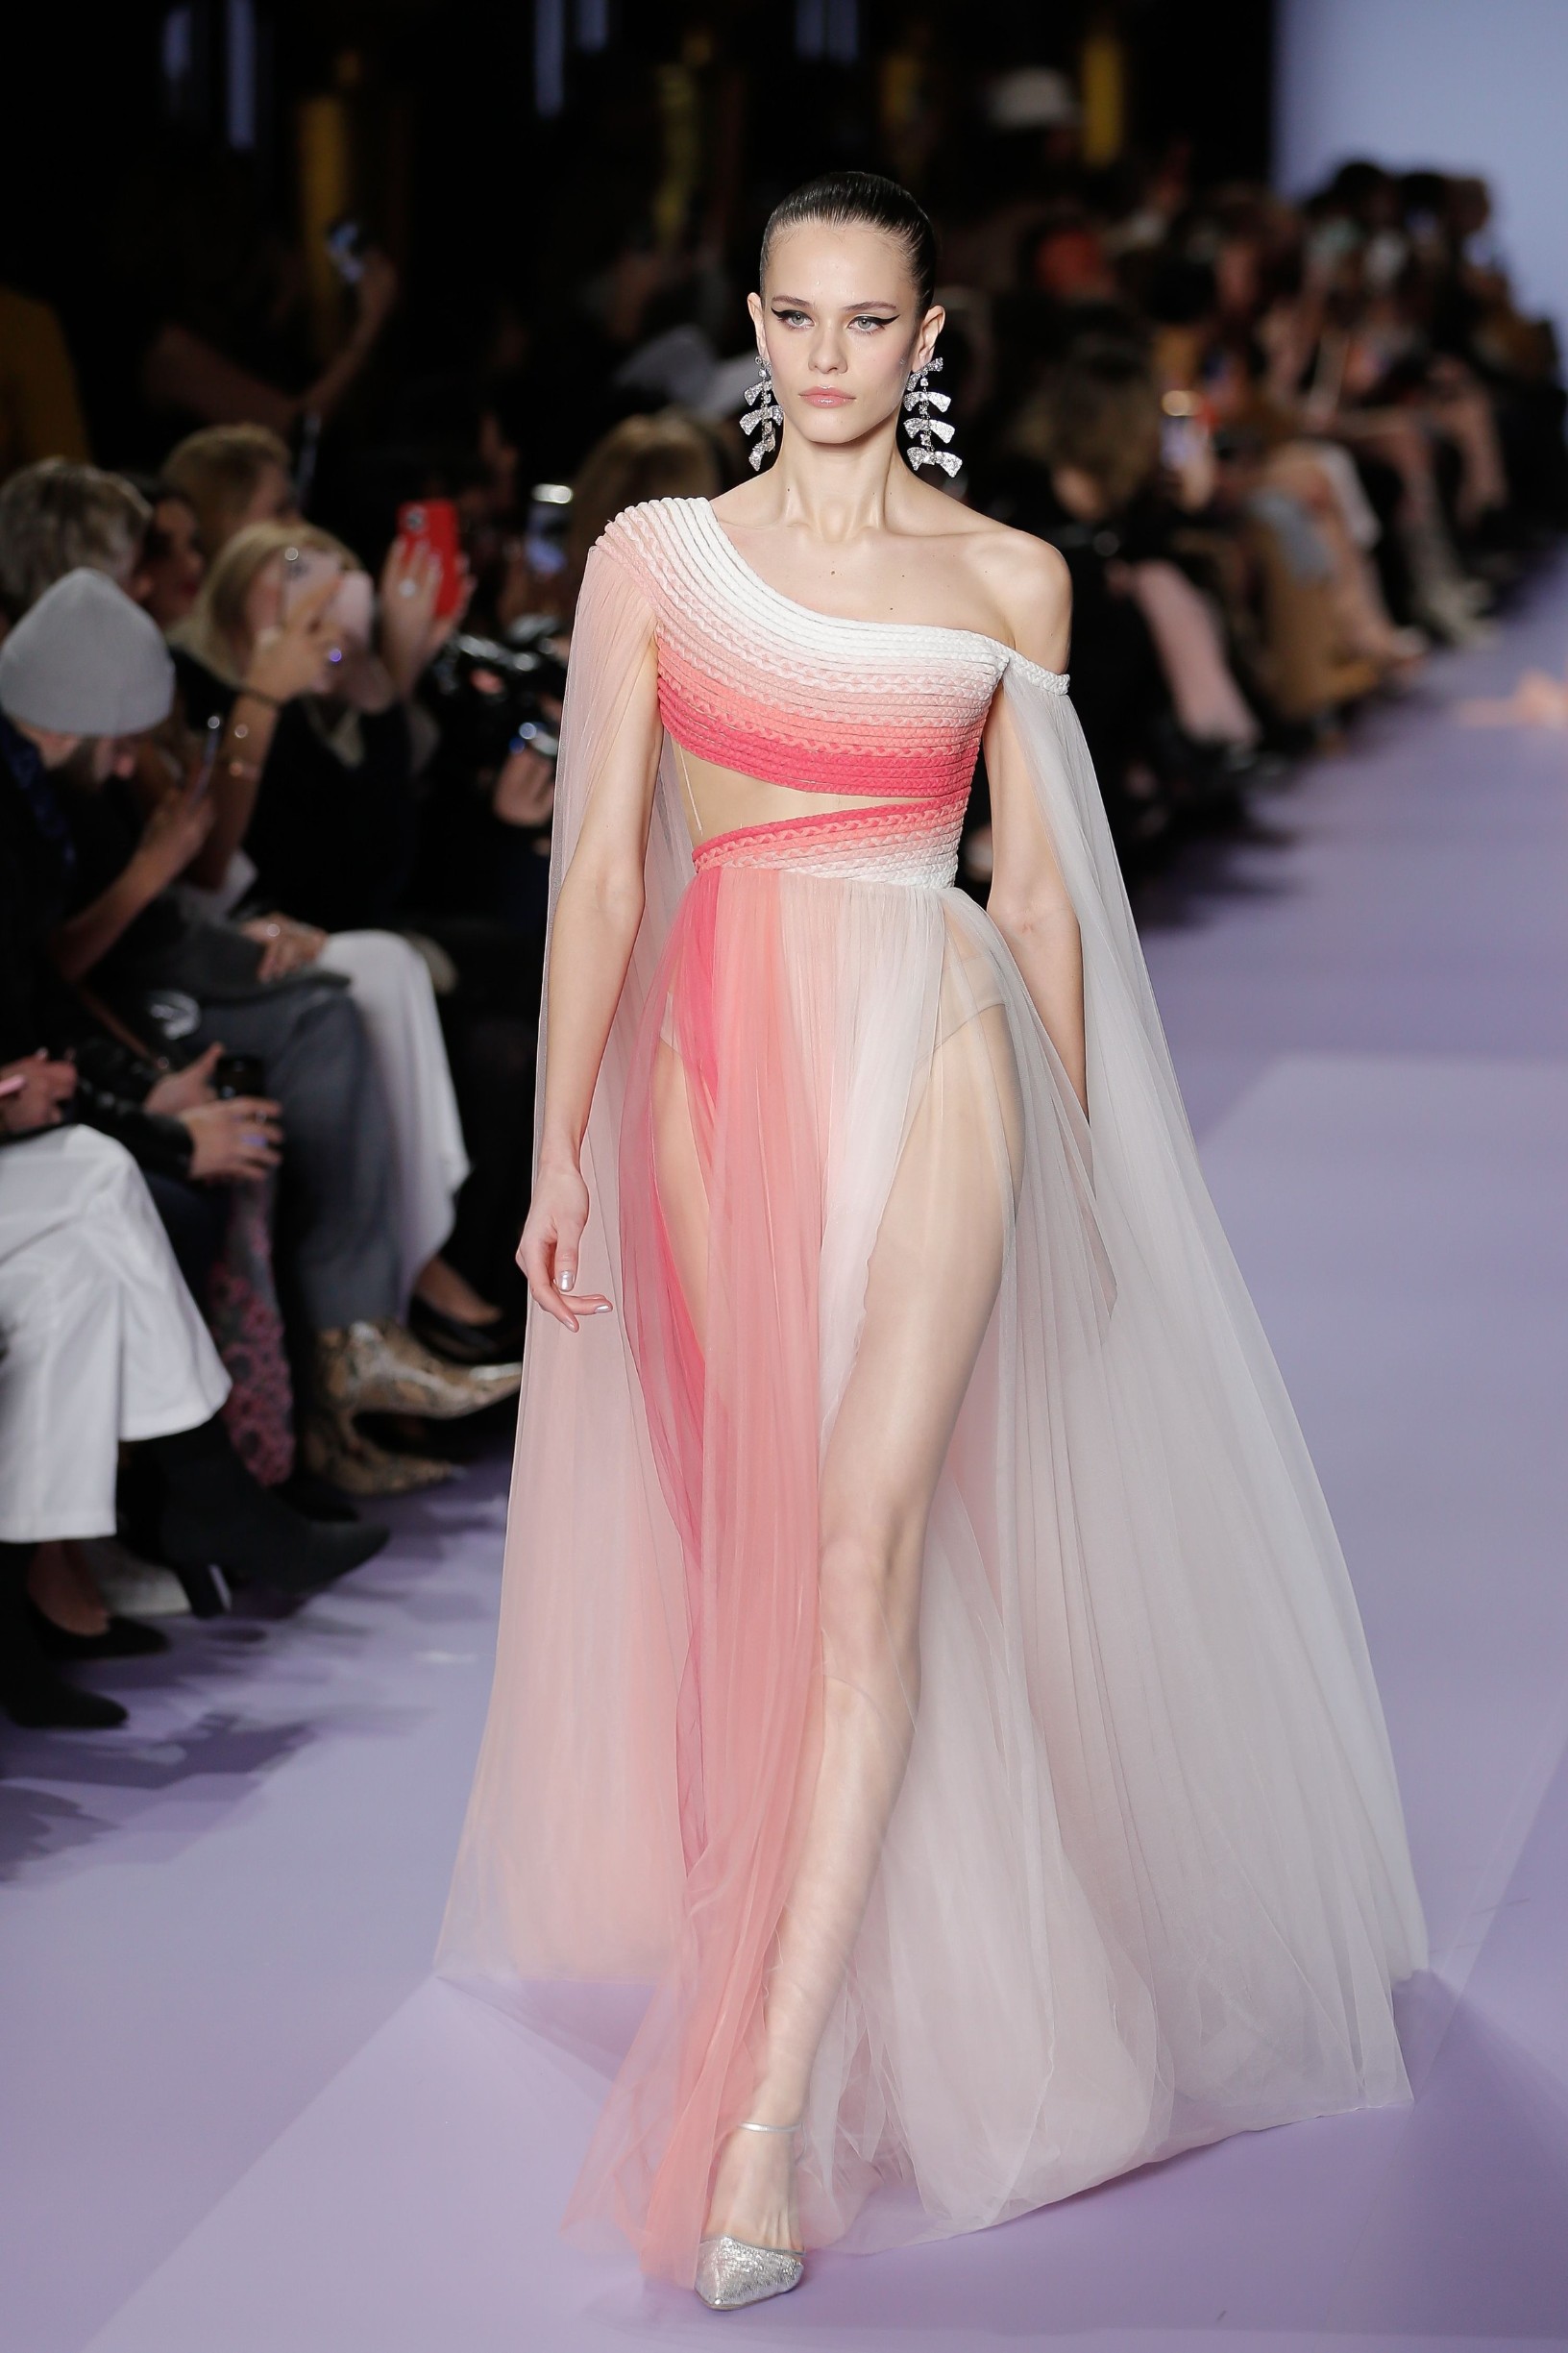 A model walks the runway at the Georges Hobeika fashion show as part of the Paris Fashion Week - Haute Couture Spring/Summer 2020. - Paris, January 20 2020//03HAEDRICHJM__A2A2235/2001210845/Credit:J.M. HAEDRICH/SIPA/2001210851, Image: 493927824, License: Rights-managed, Restrictions: , Model Release: no, Credit line: J.M. HAEDRICH / Sipa Press / Profimedia